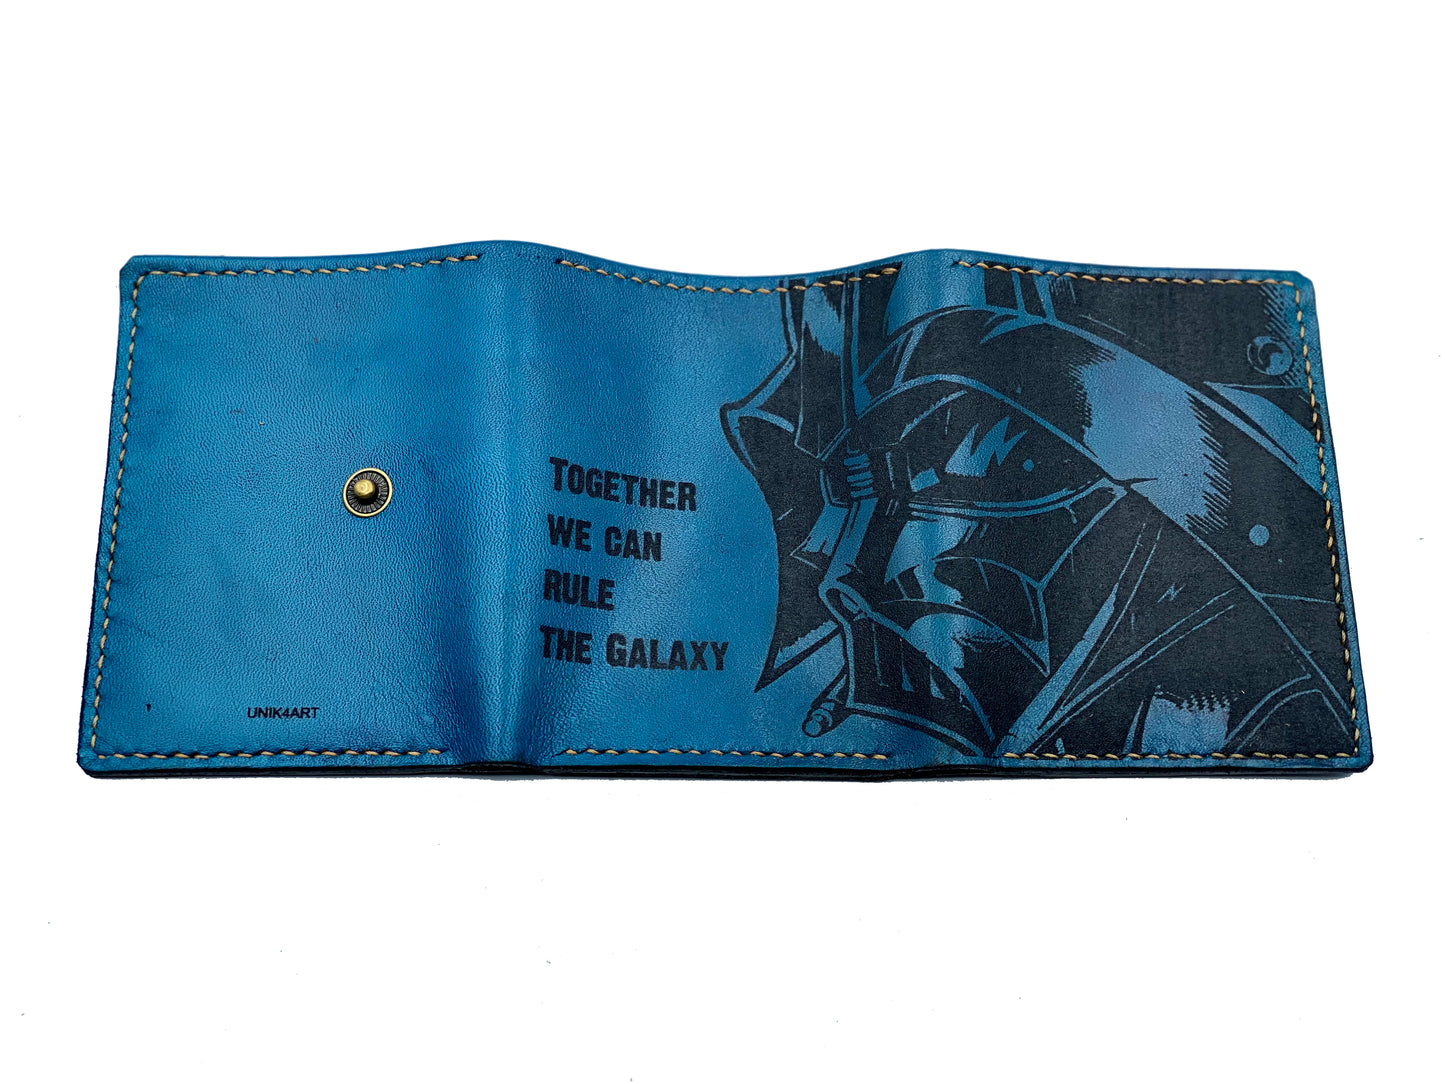 Mayan Corner - Darth Vader Mask Starwars personalized leather handmade men's wallet, custom anniversary gifts for him, Father boyfriend brother special present